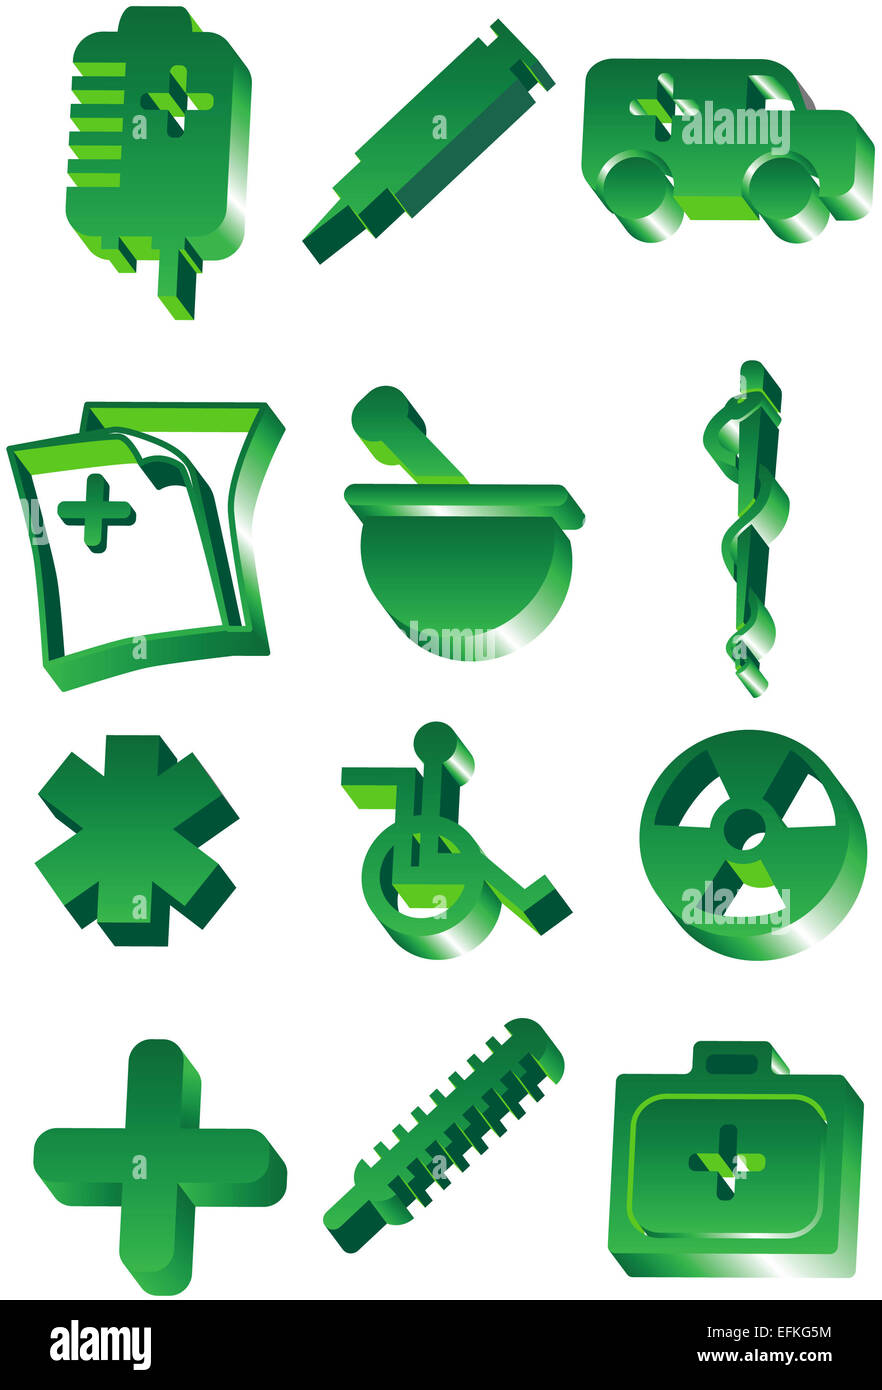 Set of green medical themed icons in a 3D style. Stock Photo